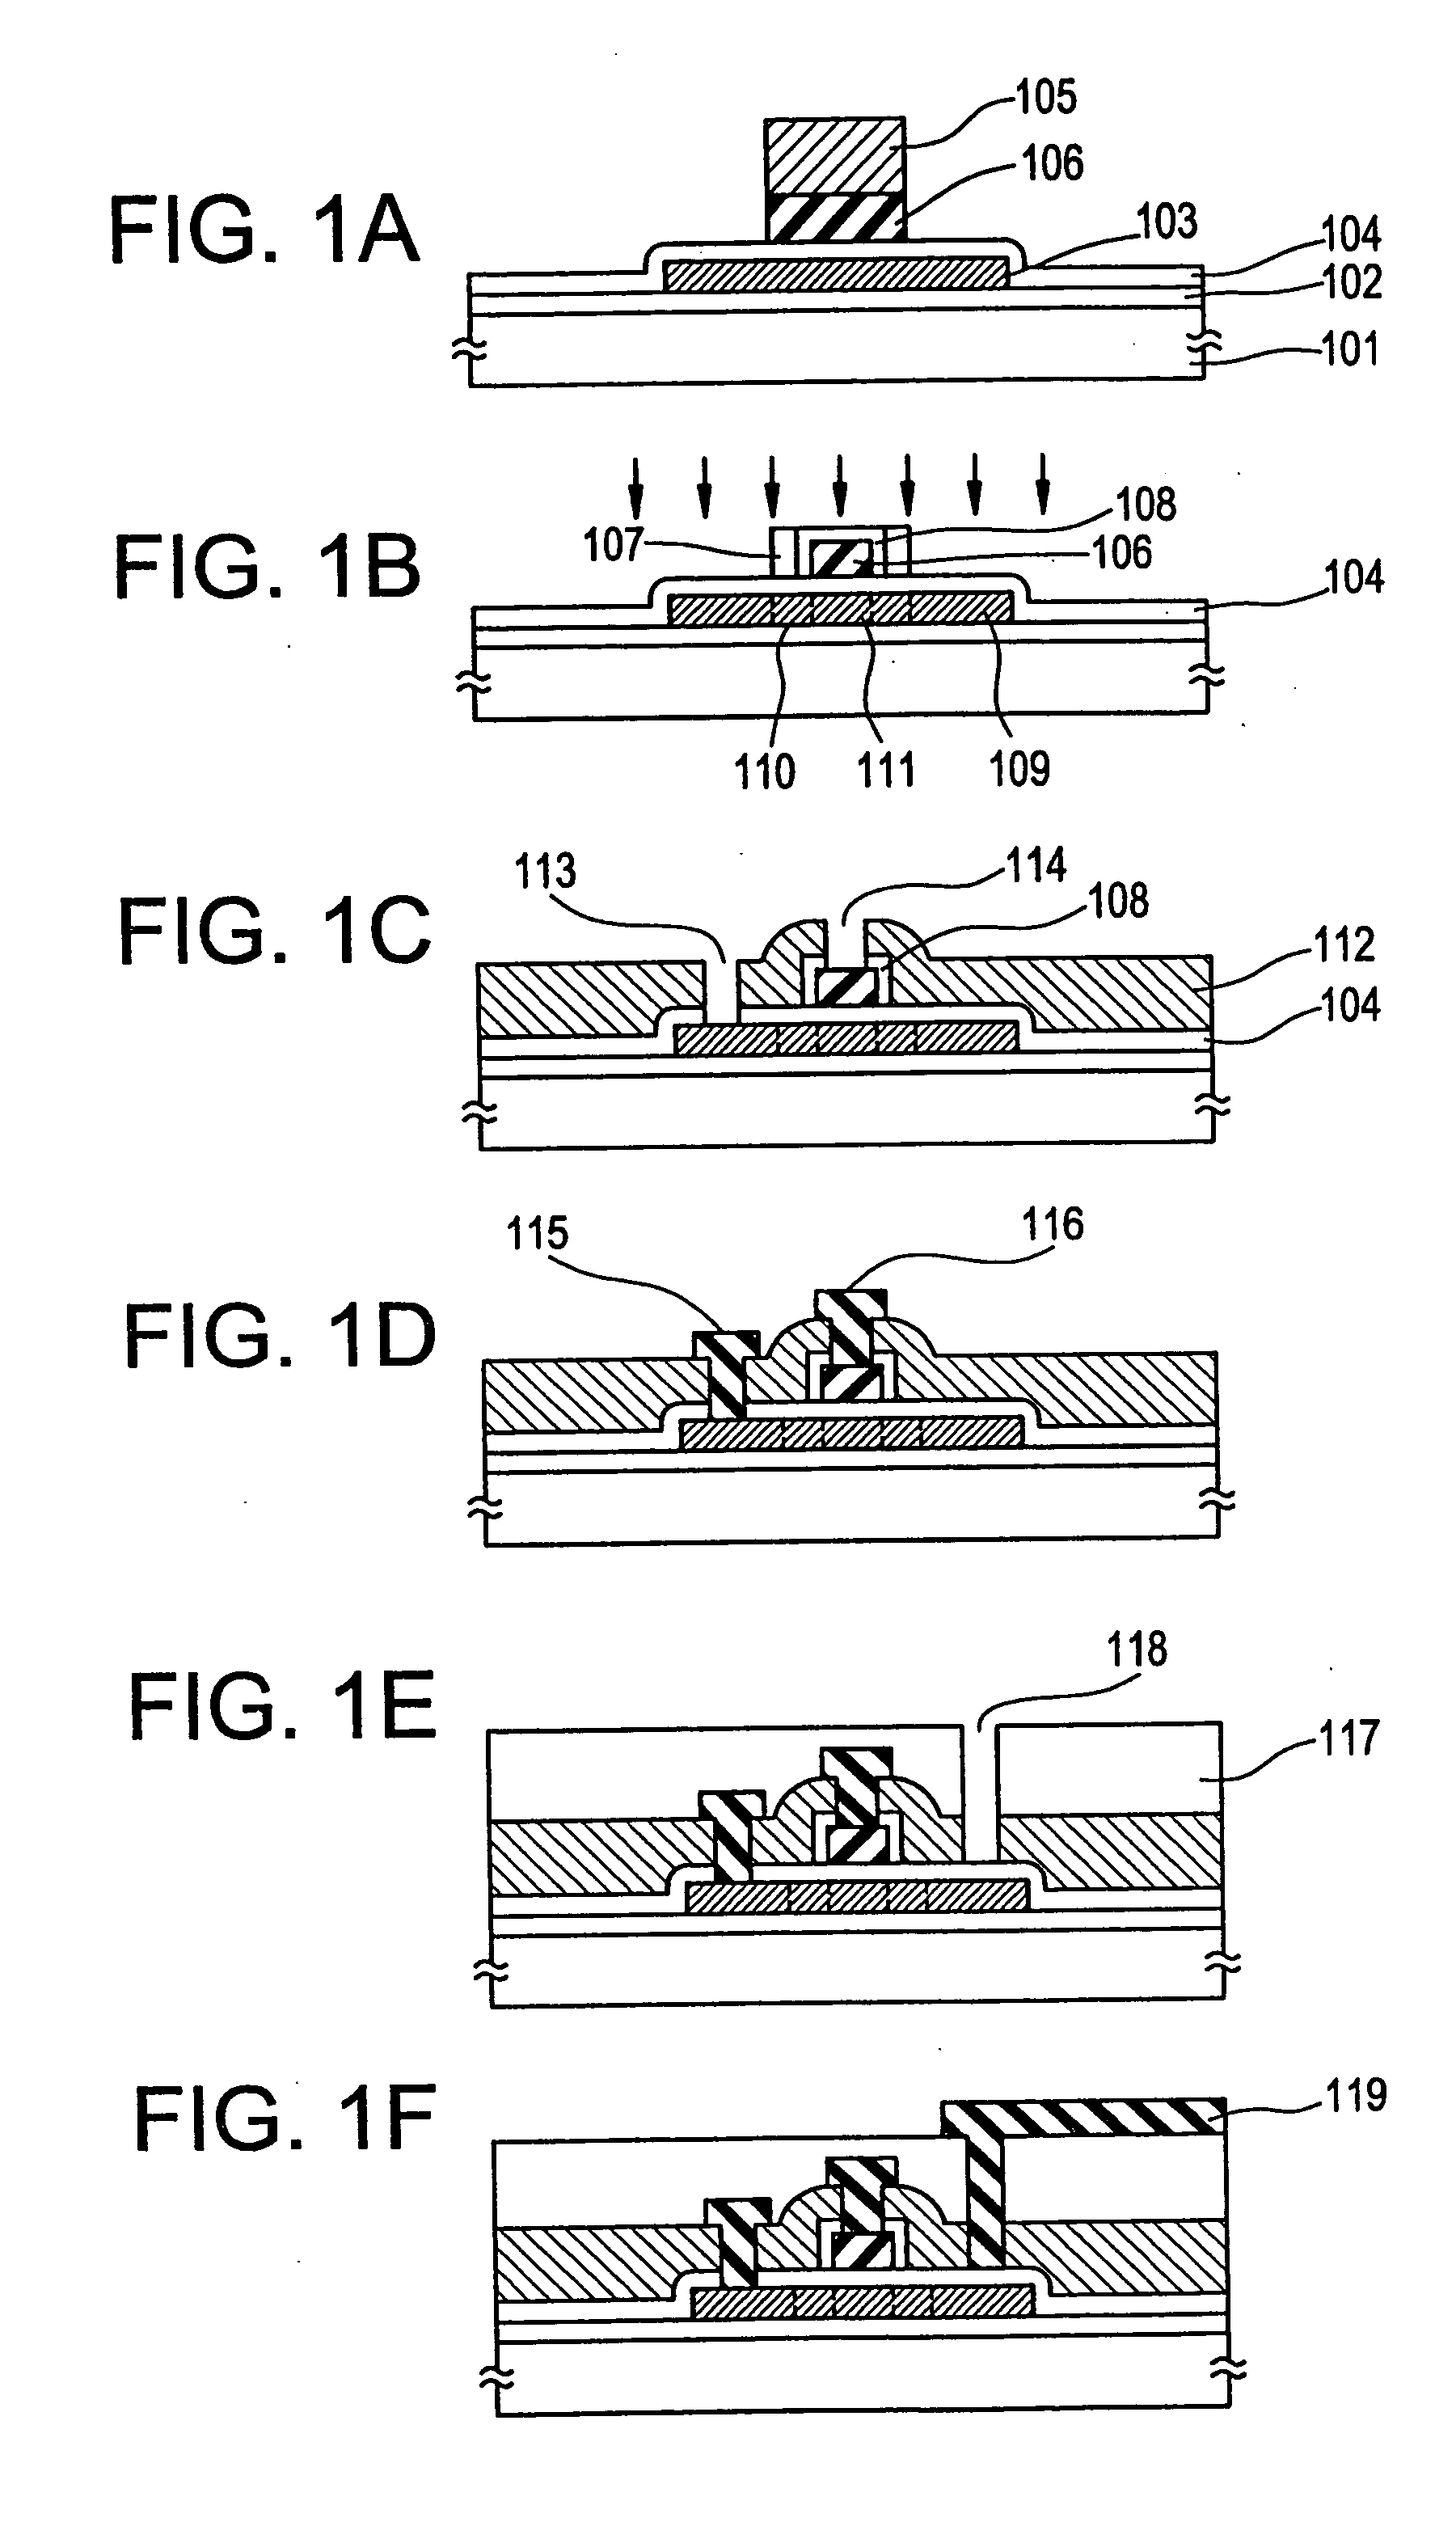 Solution applying apparatus and method